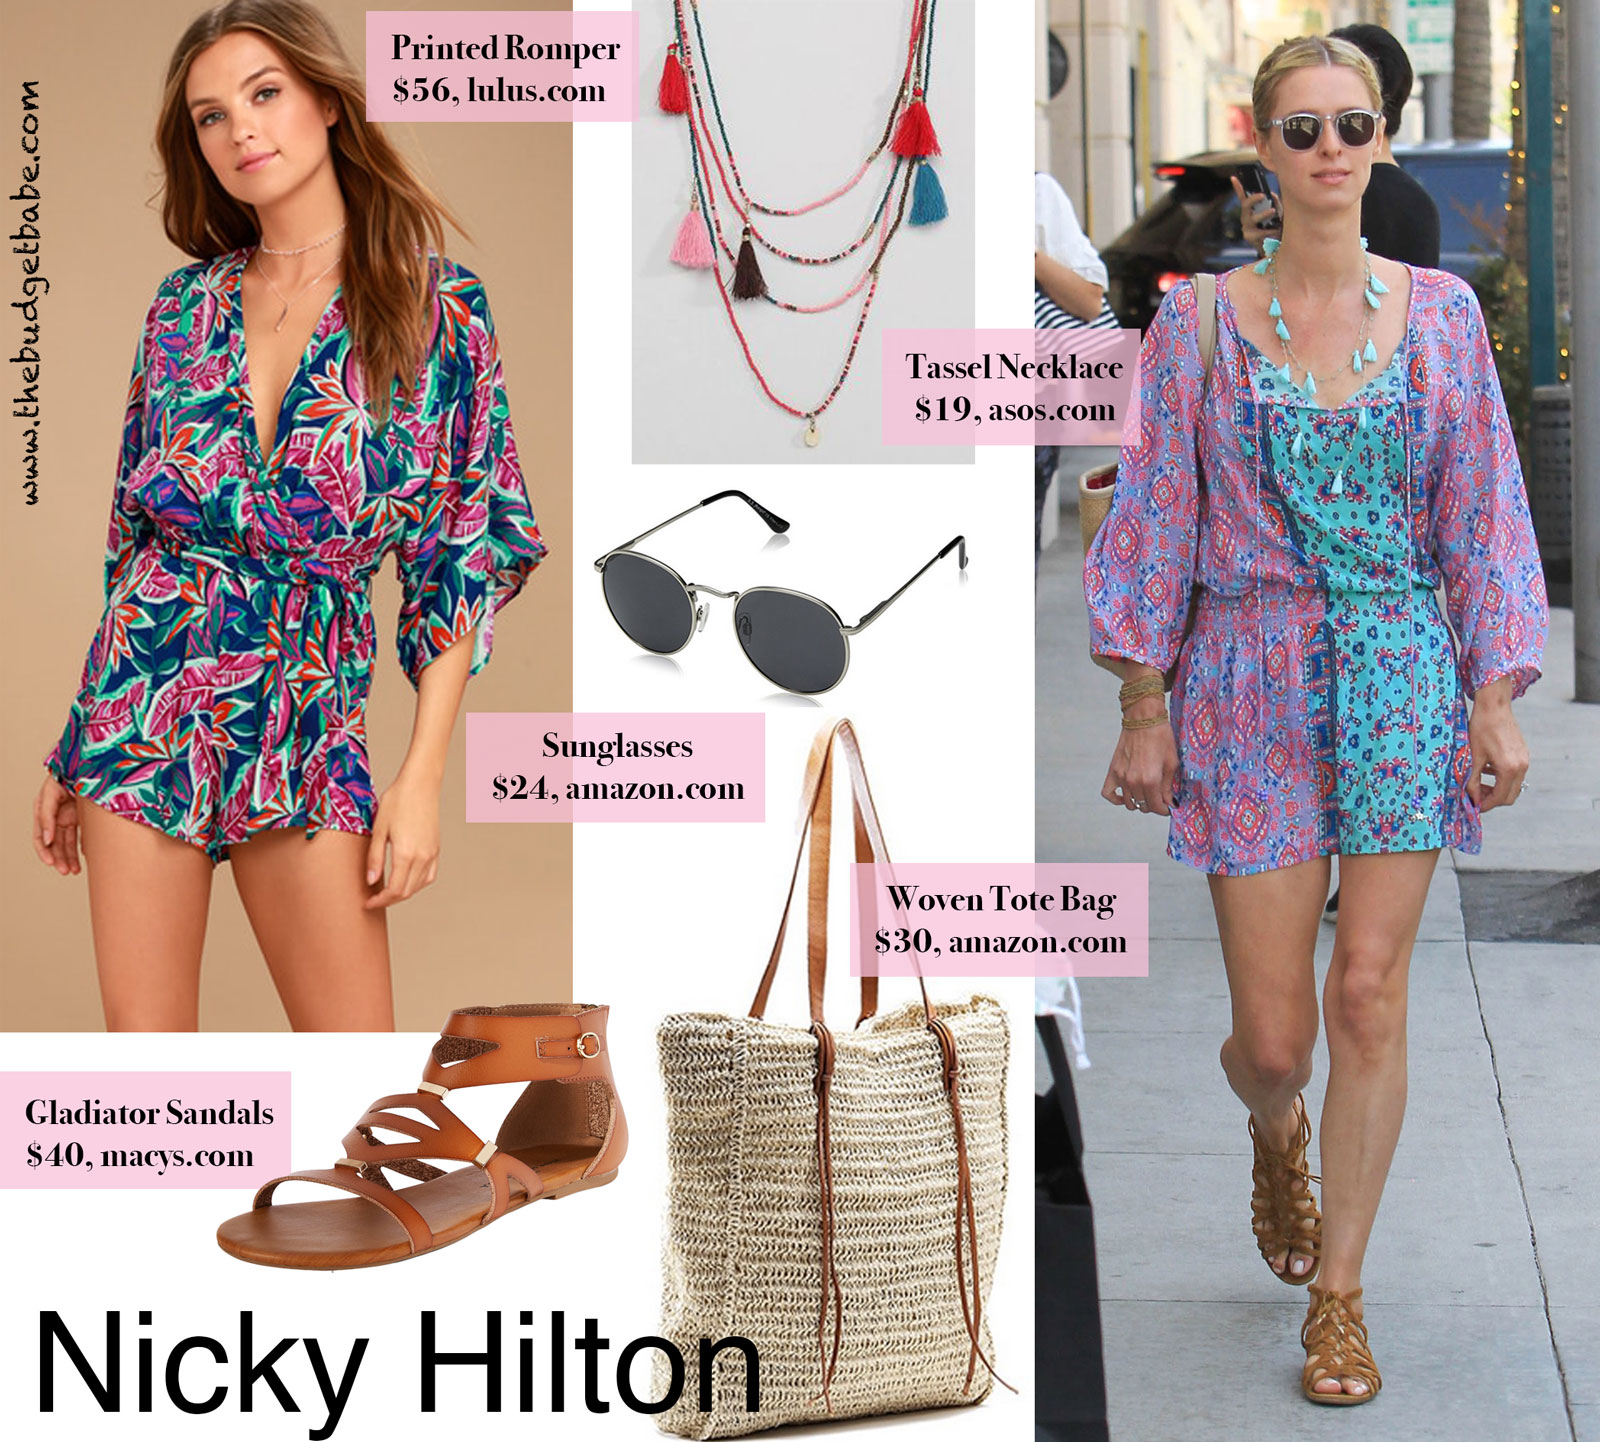 Nicky Hilton's Bright Printed Romper Look for Less